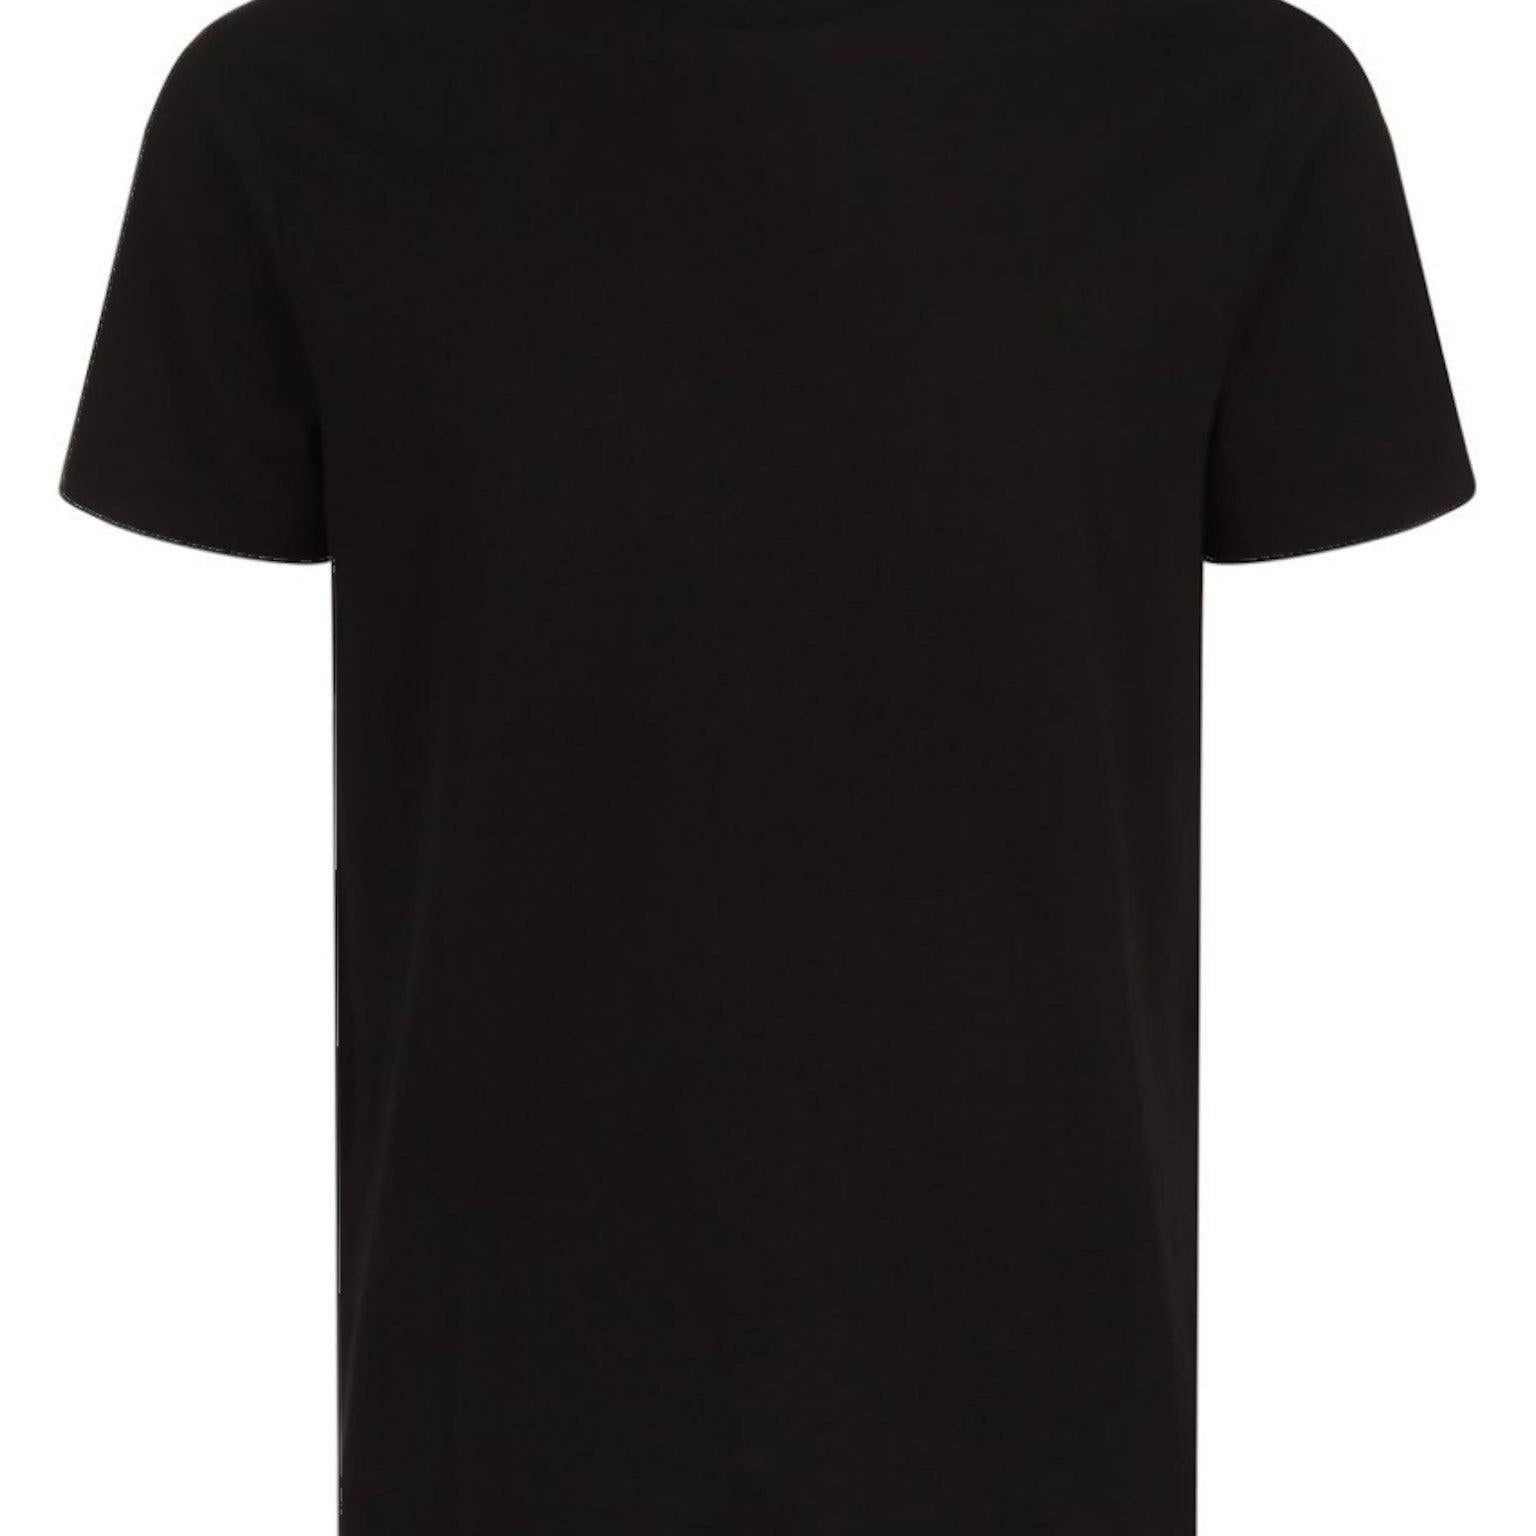 BLACK MUSCLE FIT HIGH NECK T-SHIRT--Mich & Jane